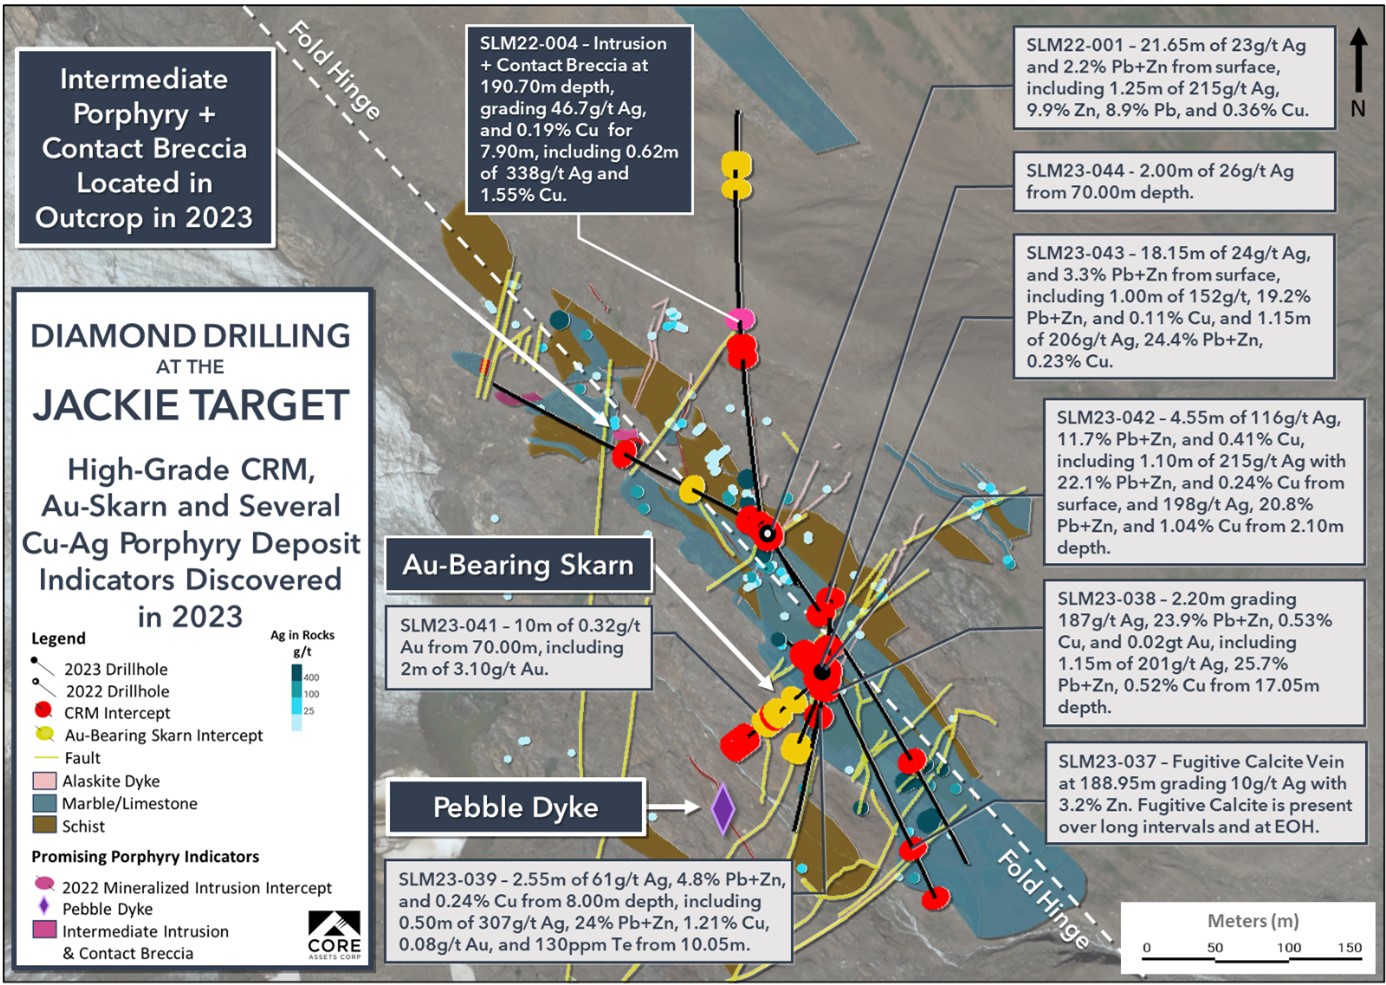 The map shows the geological drilling with coloured markers for different minerals and text boxes describing results and locations for 2023 on the Jackie target.